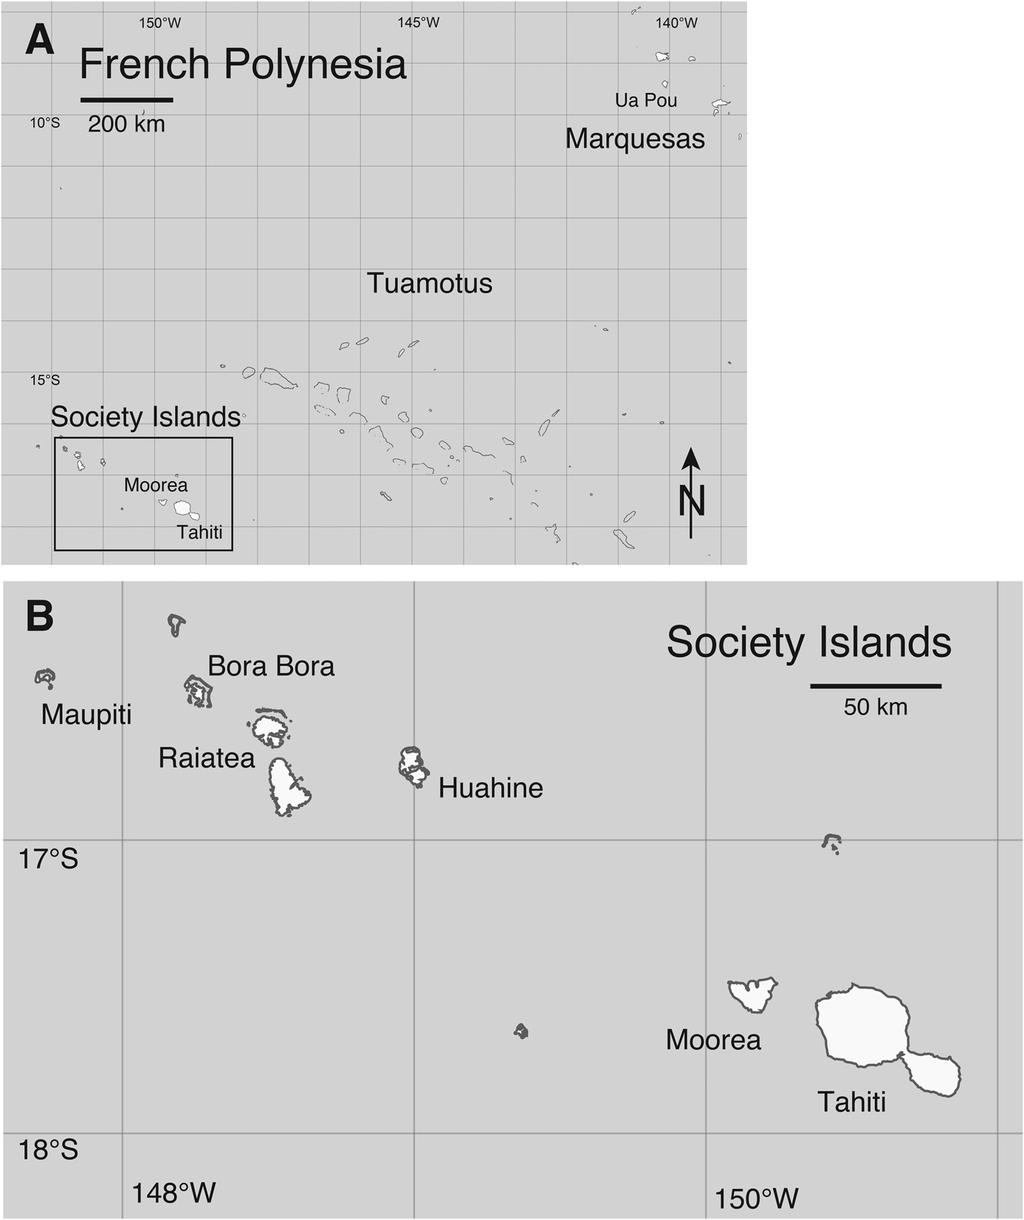 398 SYSTEMATIC BOTANY [Volume 43 Fig. 1. Map of the study area. A. French Polynesia, showing the locations of Moorea (Society Islands) and Ua Pou (Marquesas Islands).